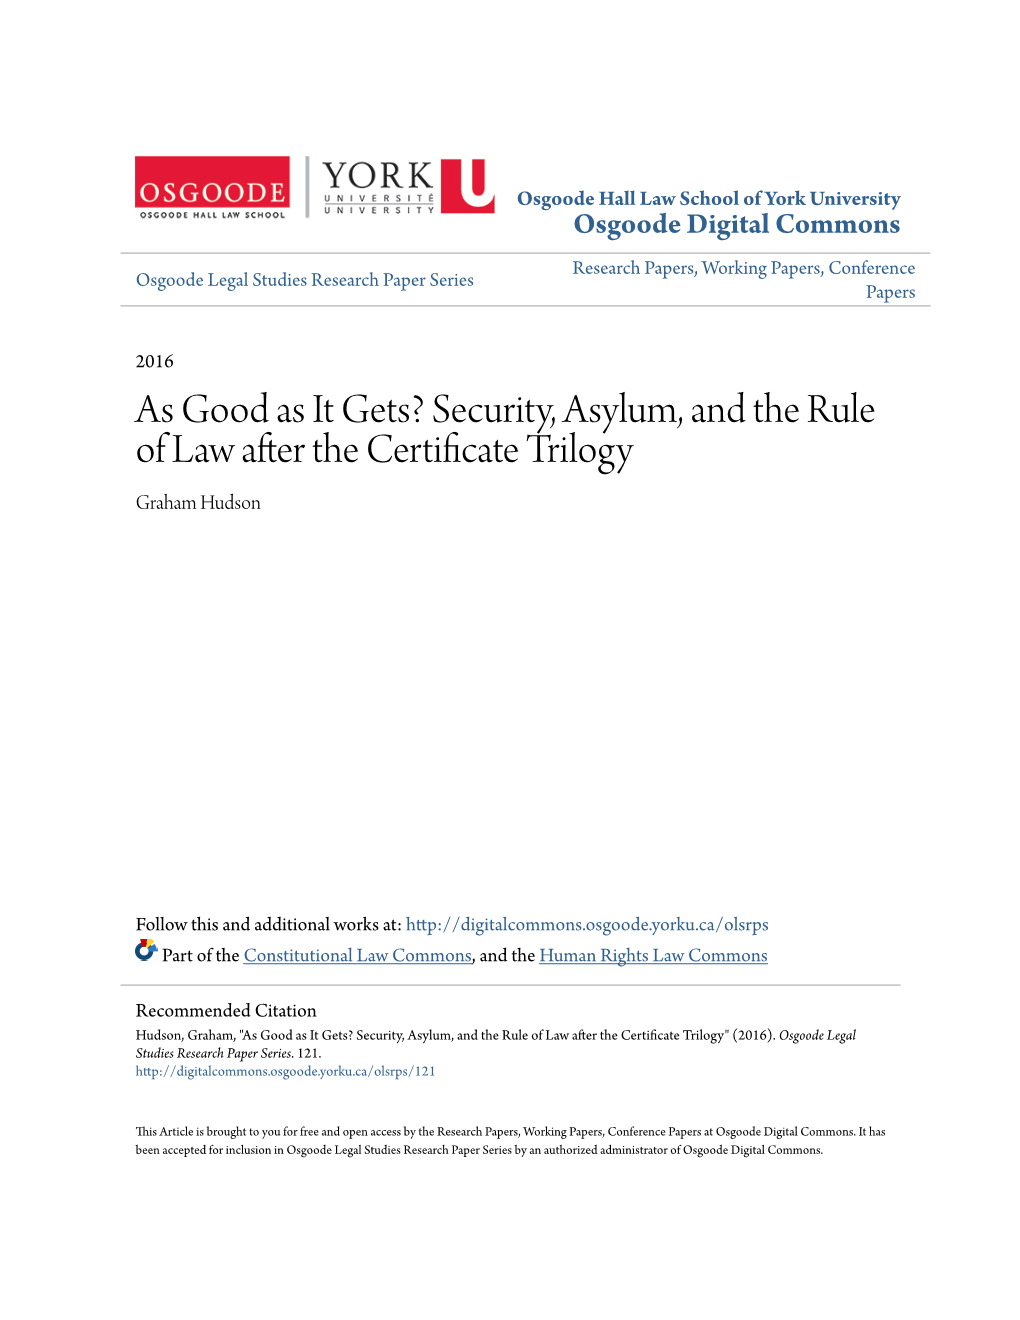 Security, Asylum, and the Rule of Law After the Certificate Trilogy Graham Hudson